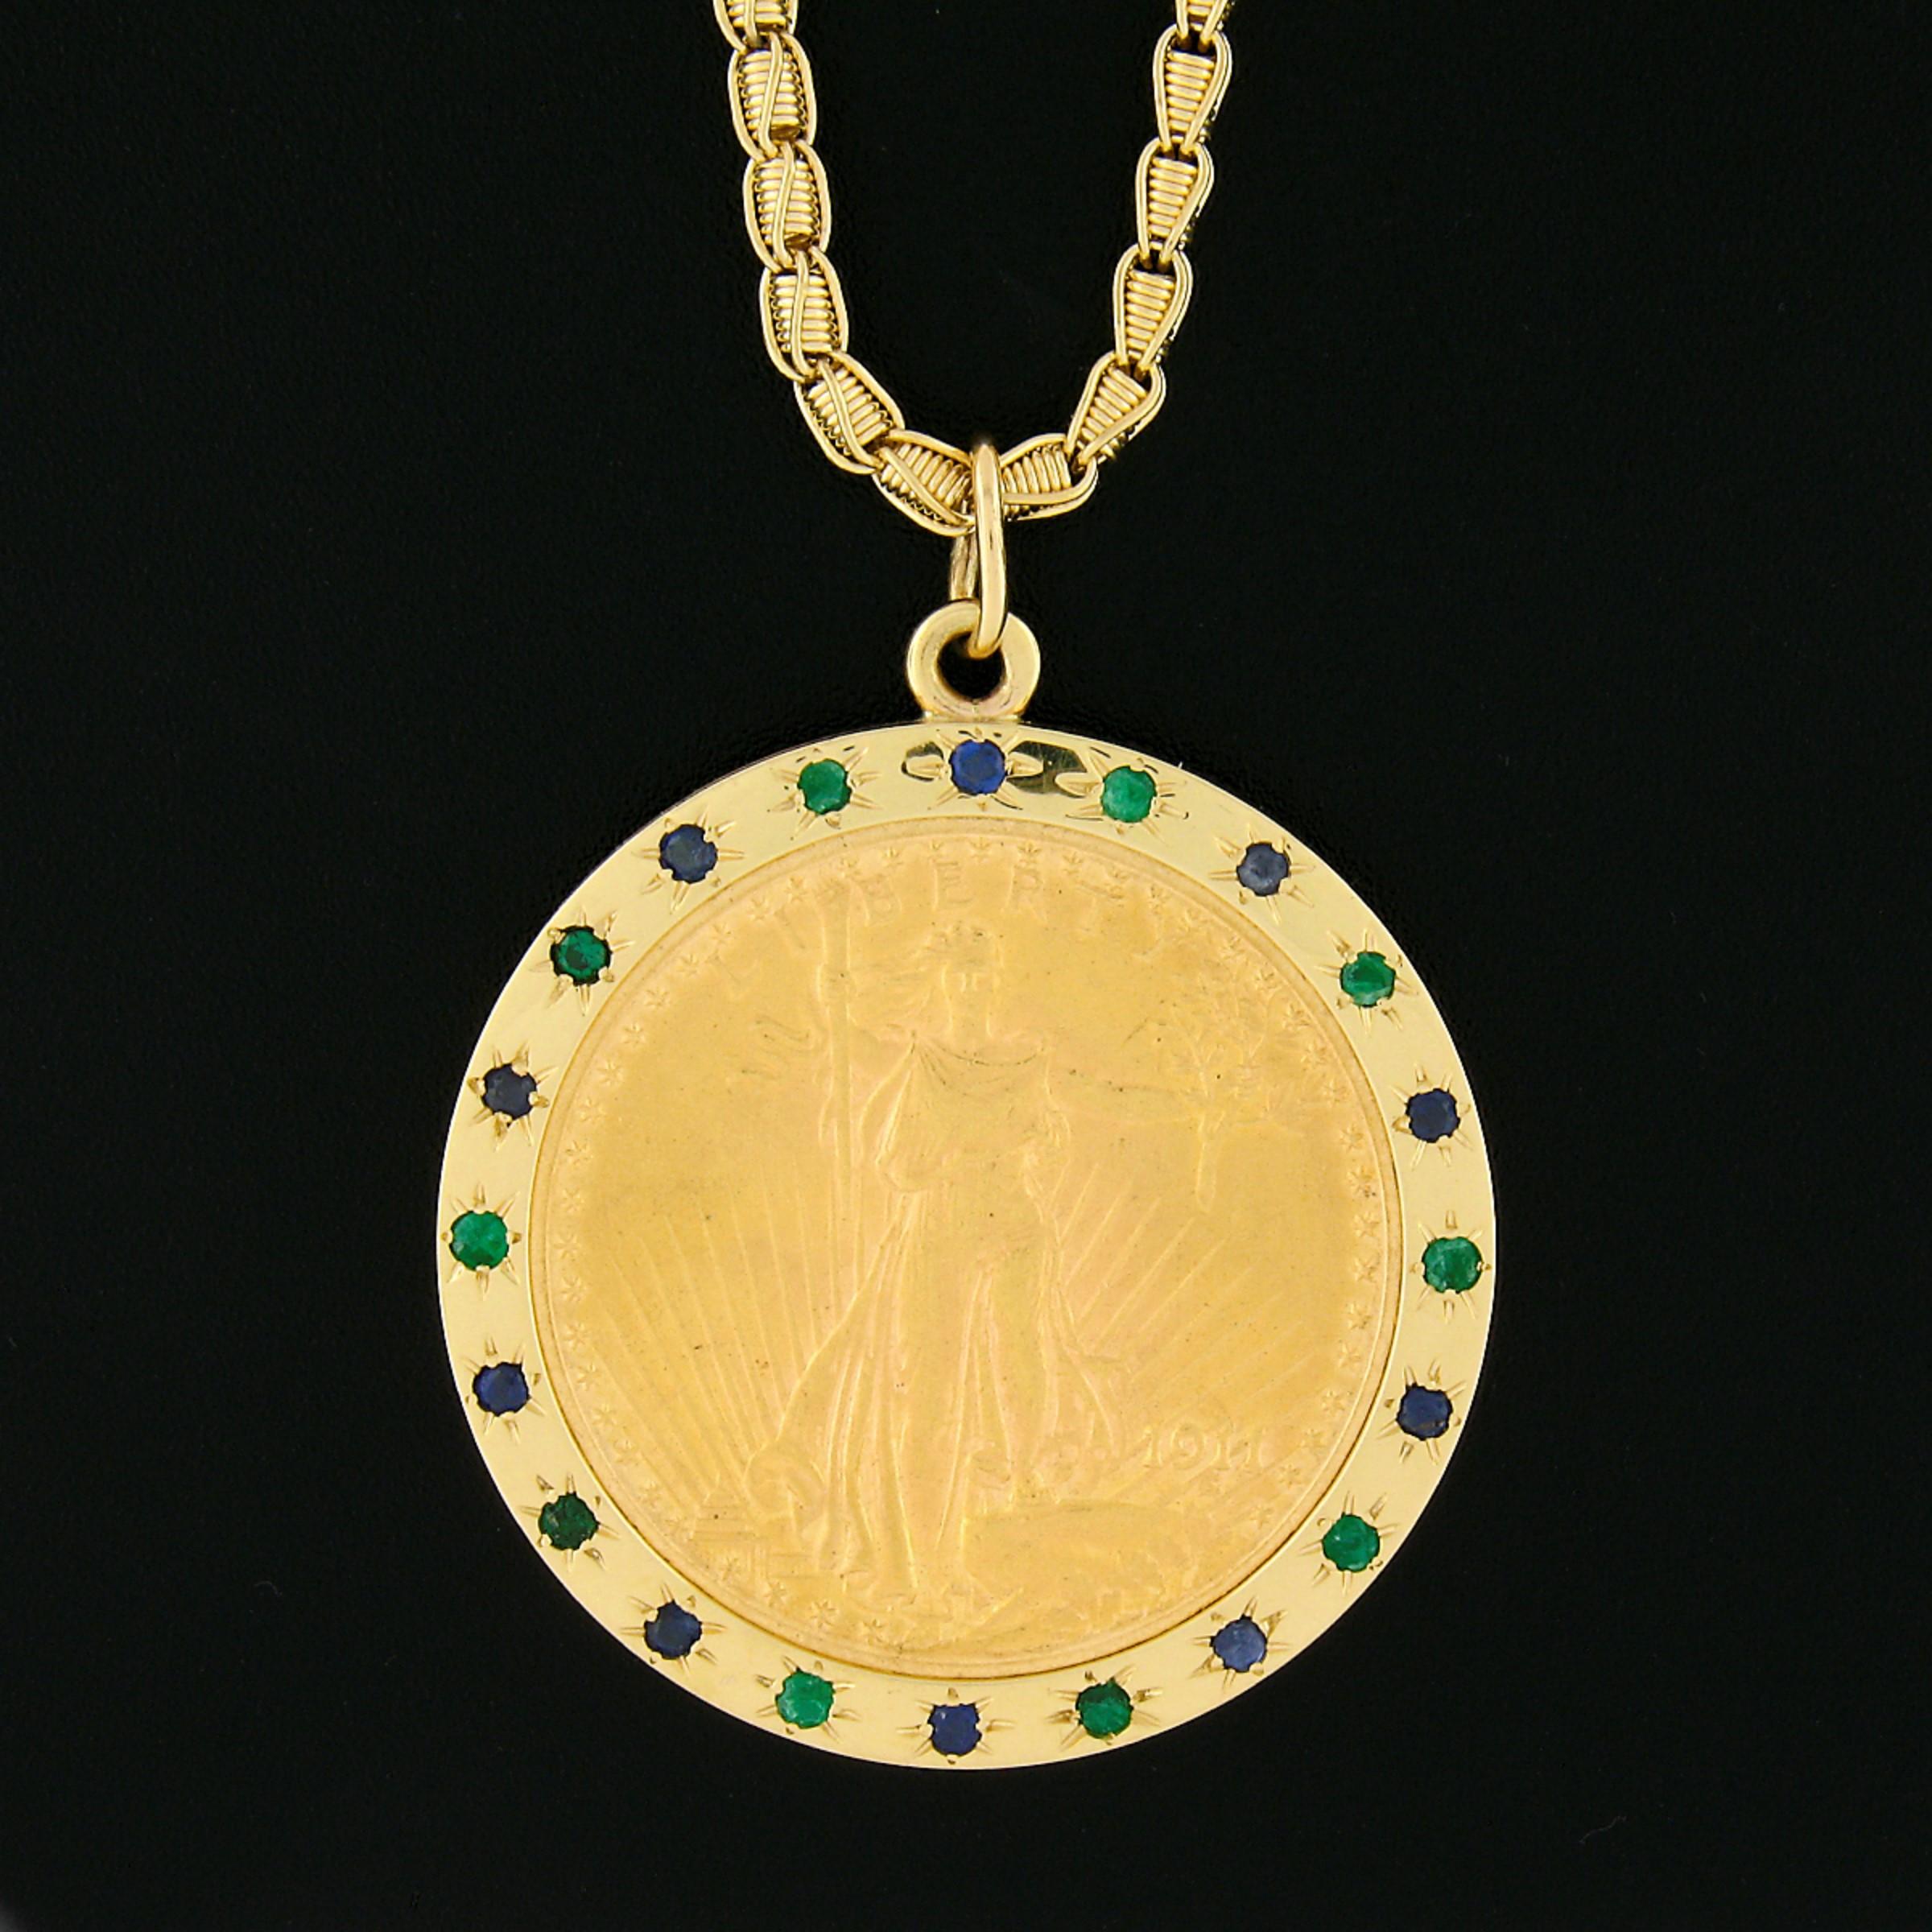 This large and impressive pendant necklace was crafted from solid 14k yellow gold and features a 1911 twenty dollar coin piece neatly bezel set at the center. The coin is surrounded by a nice polished finish frame that is adorned with an alternating